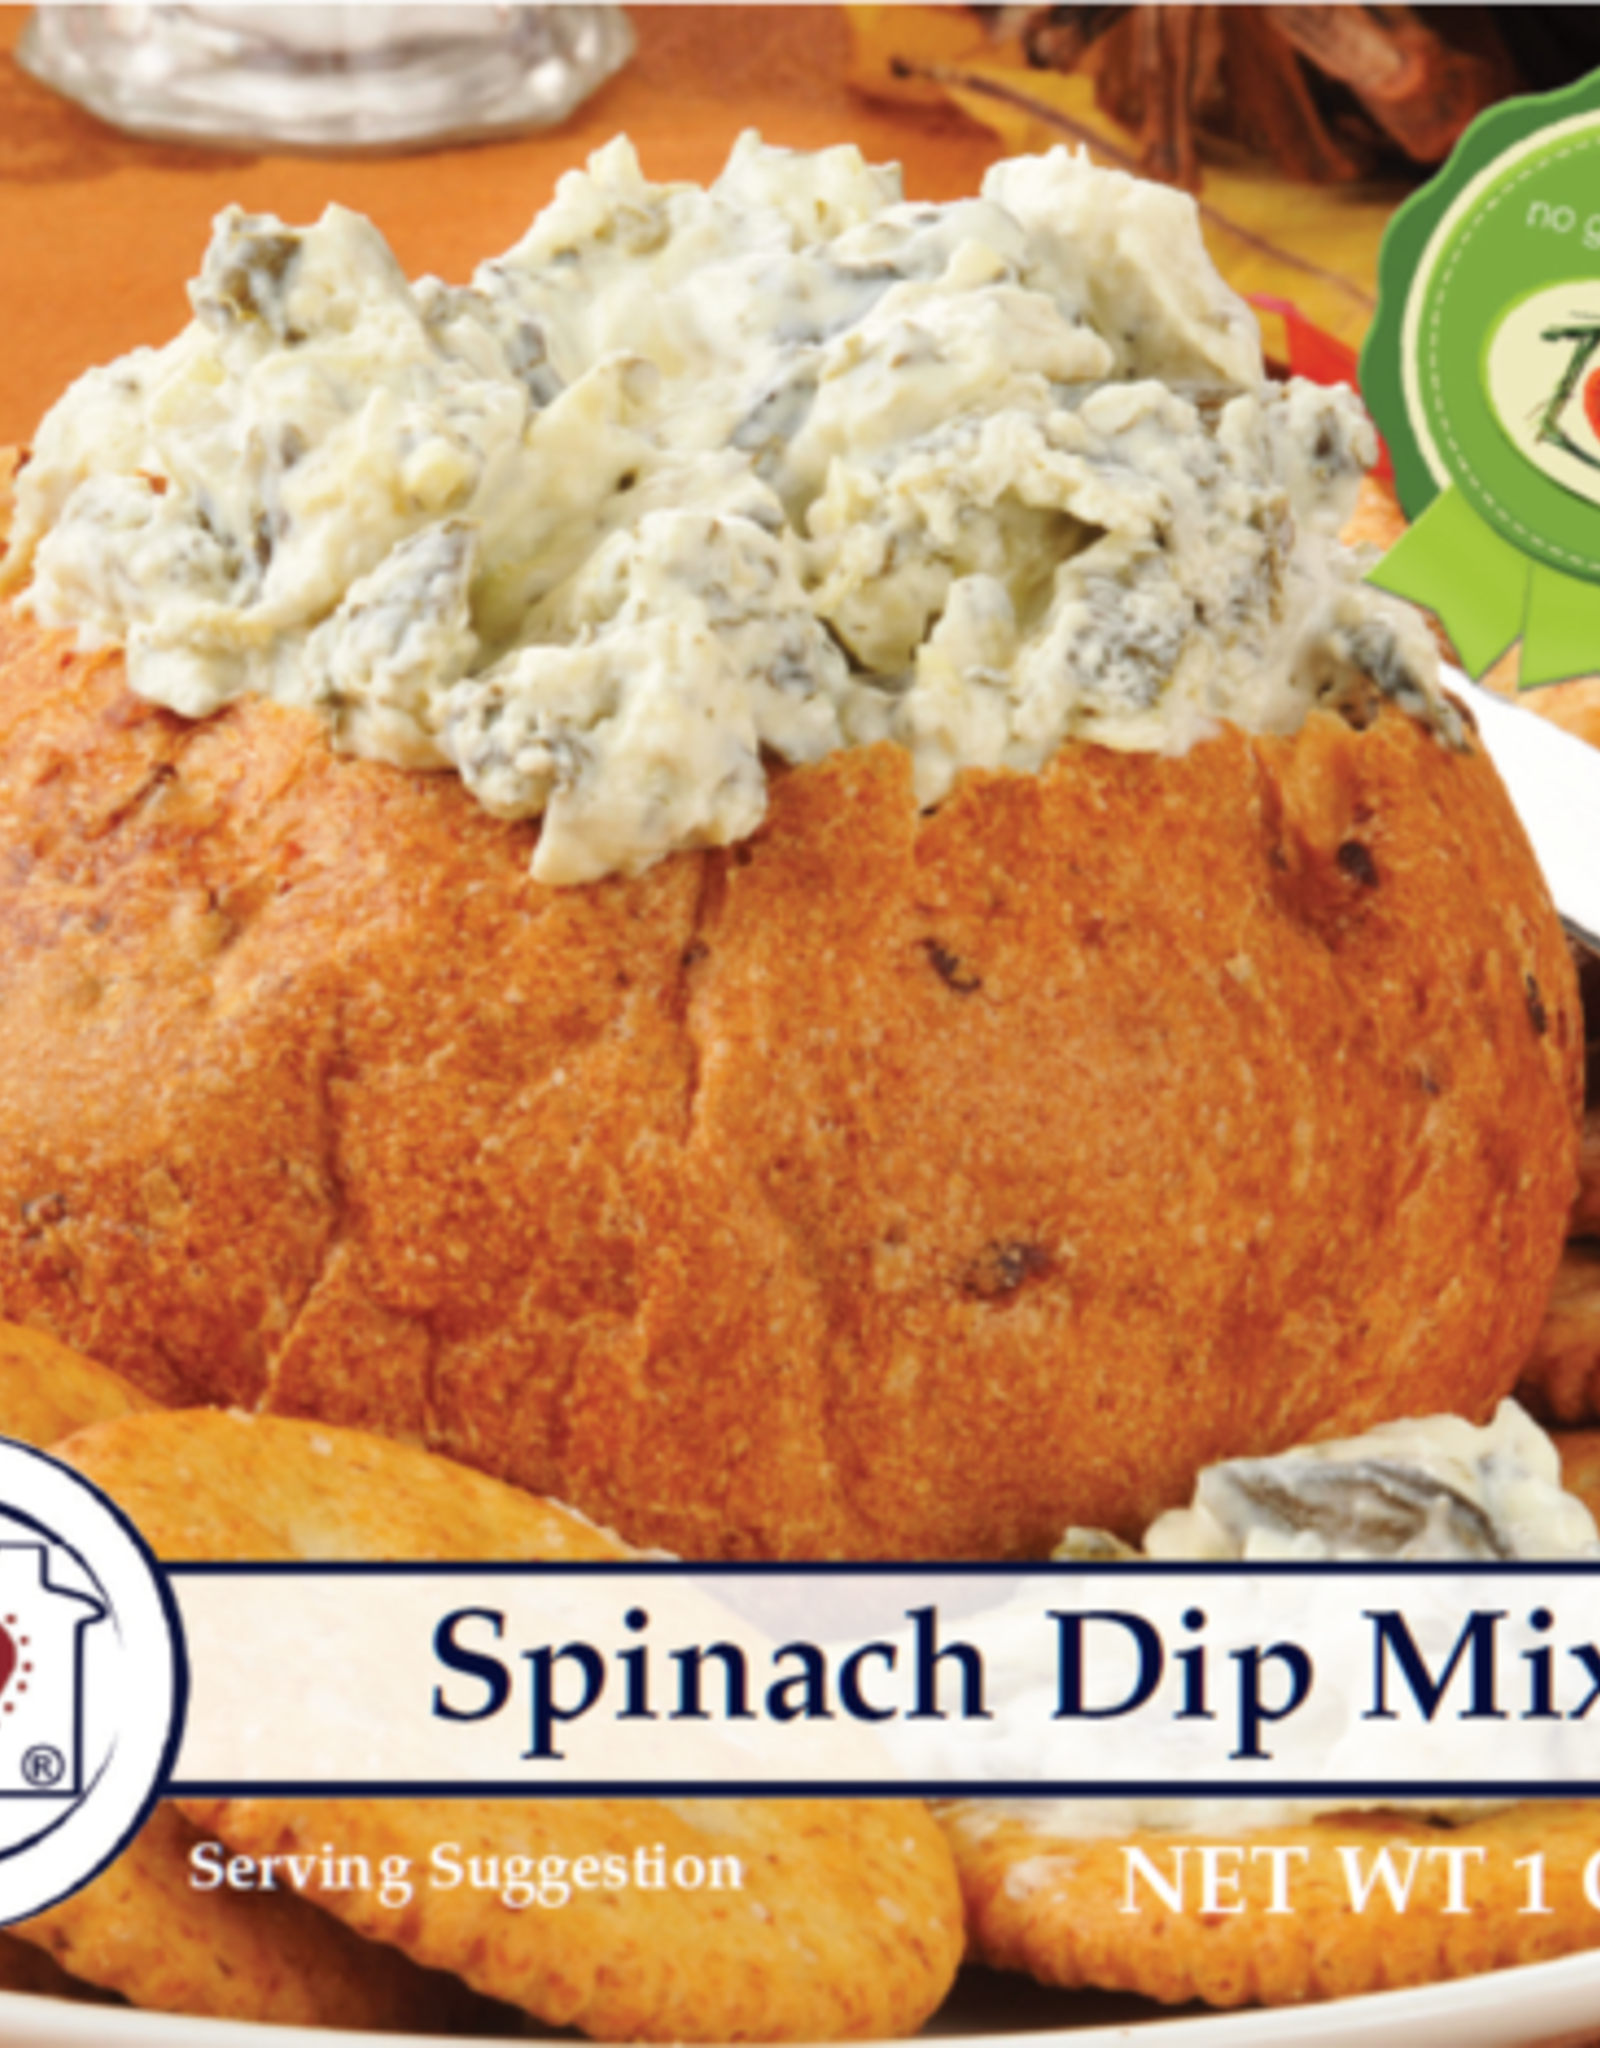 Country Home Creations SPINACH DIP MIX